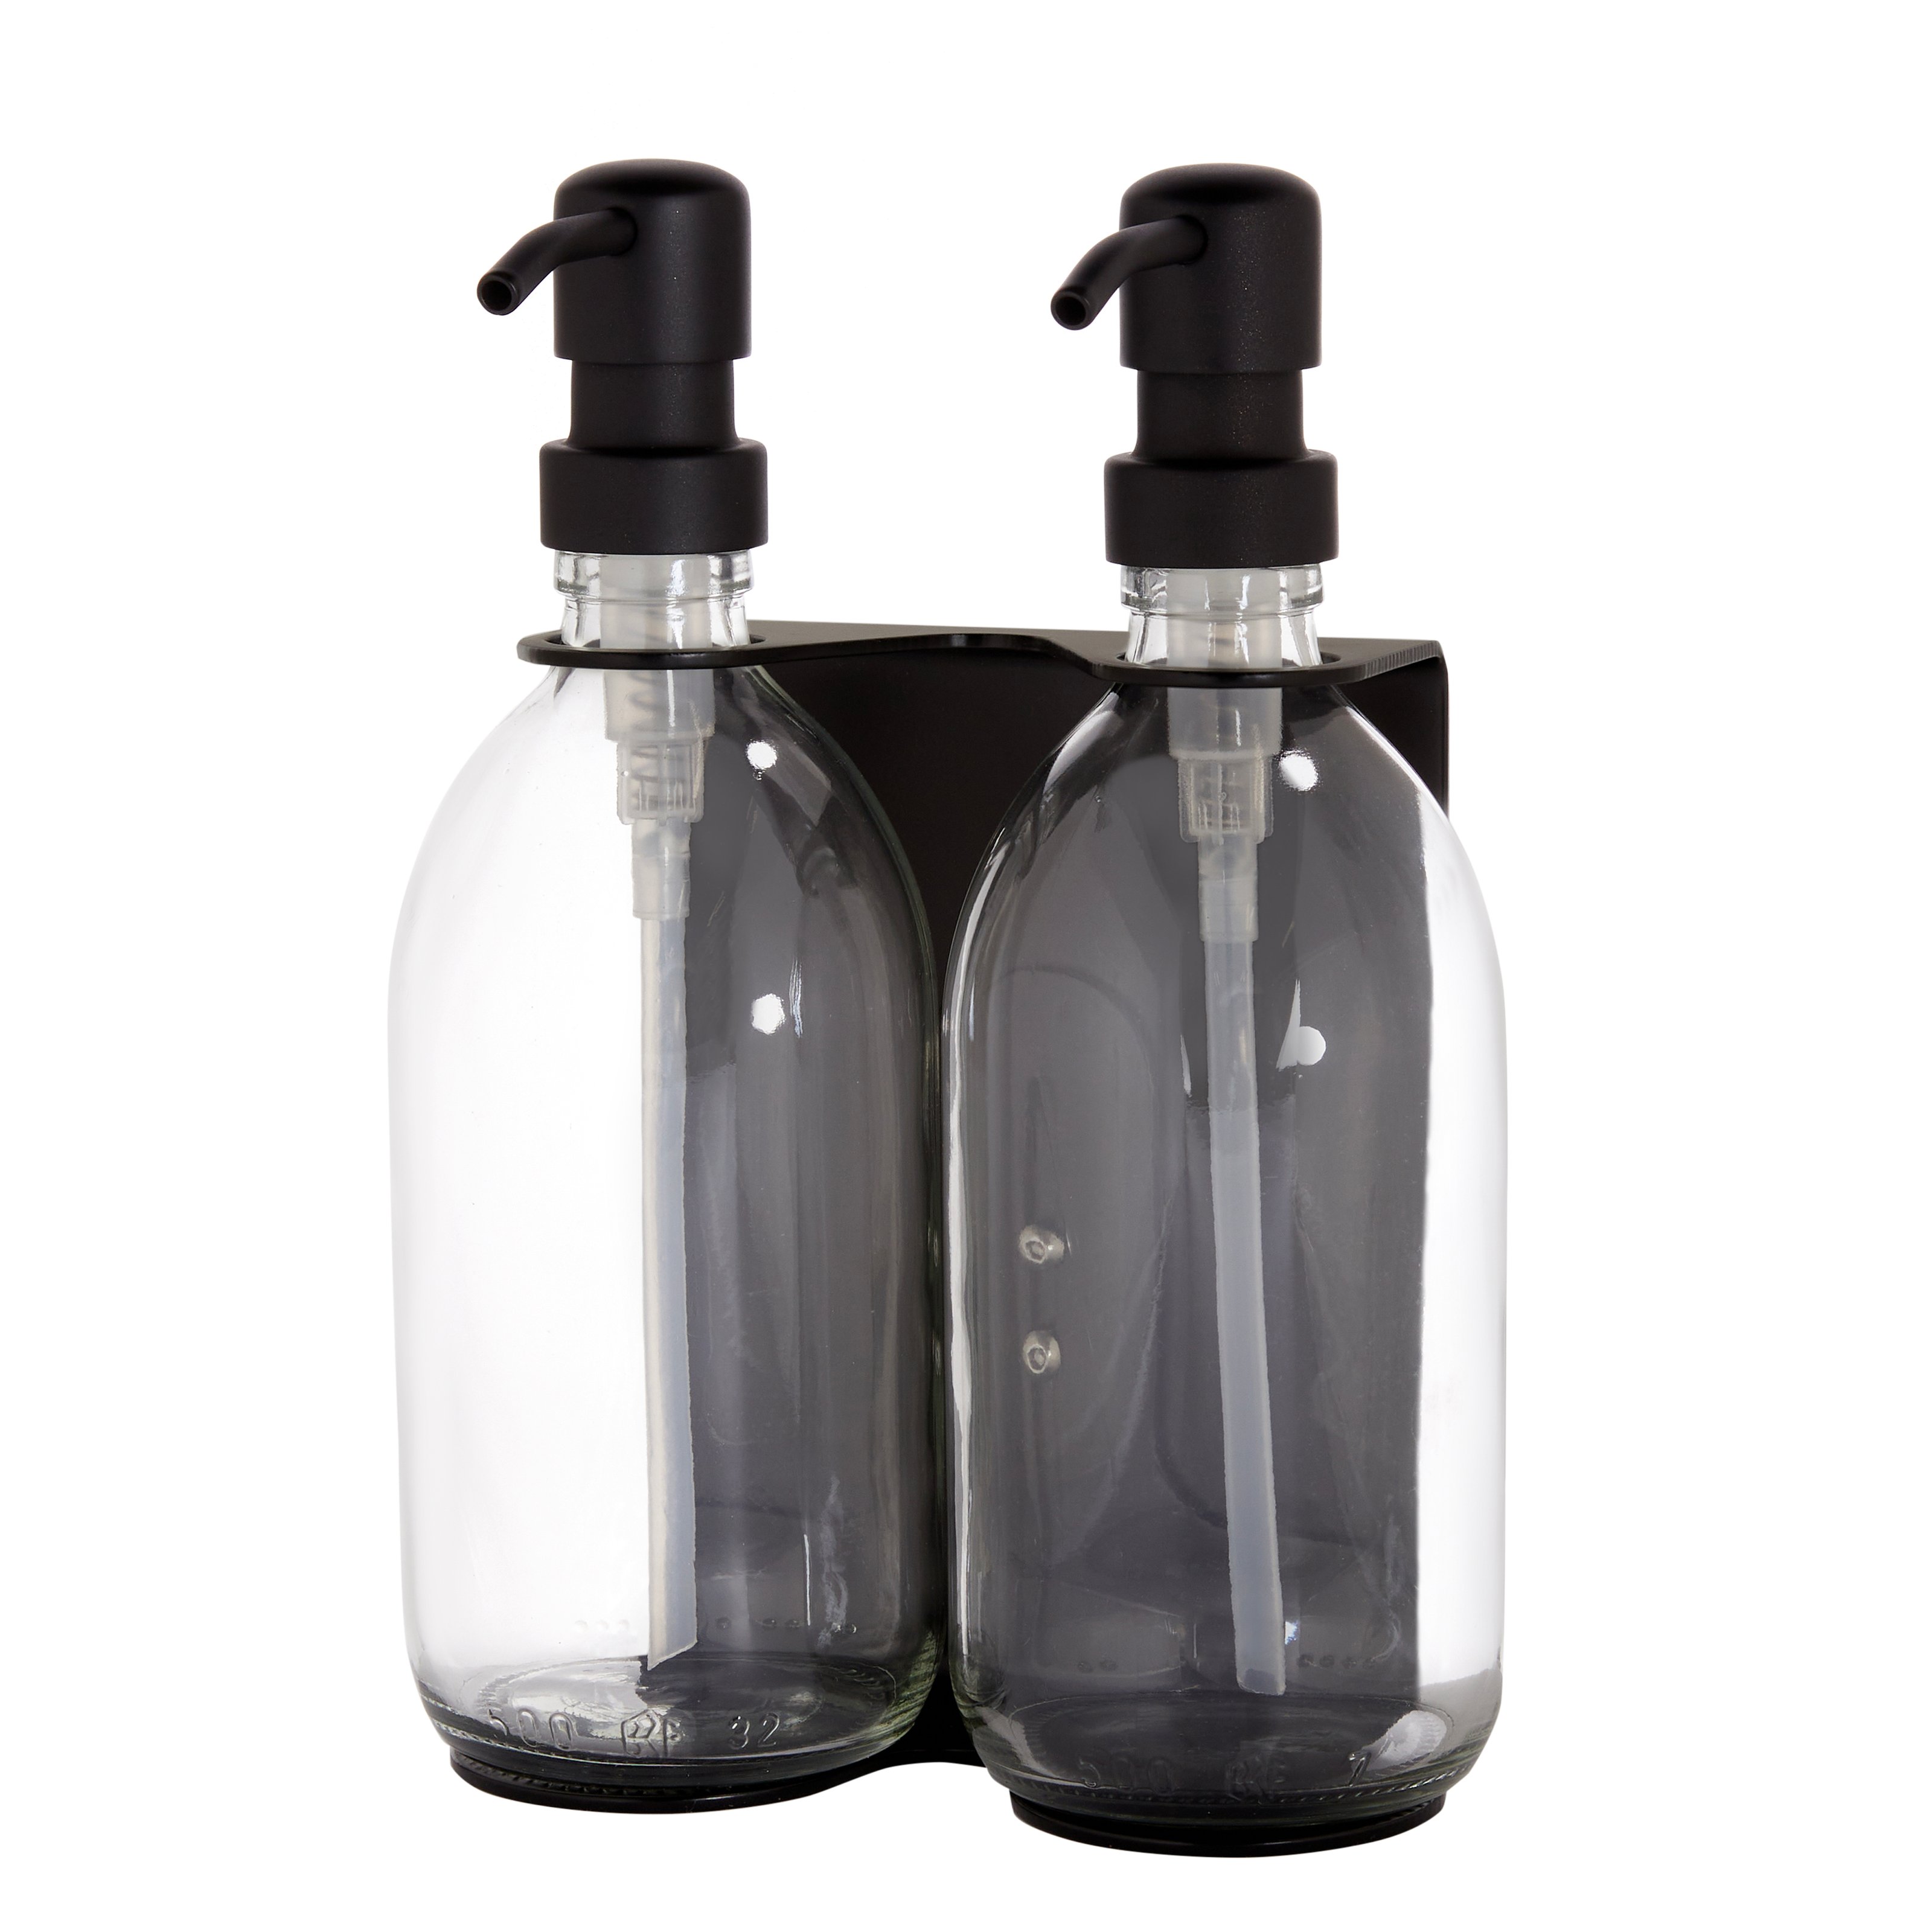 Black wall mounted holder with clear transparent bottles and black metal pumps